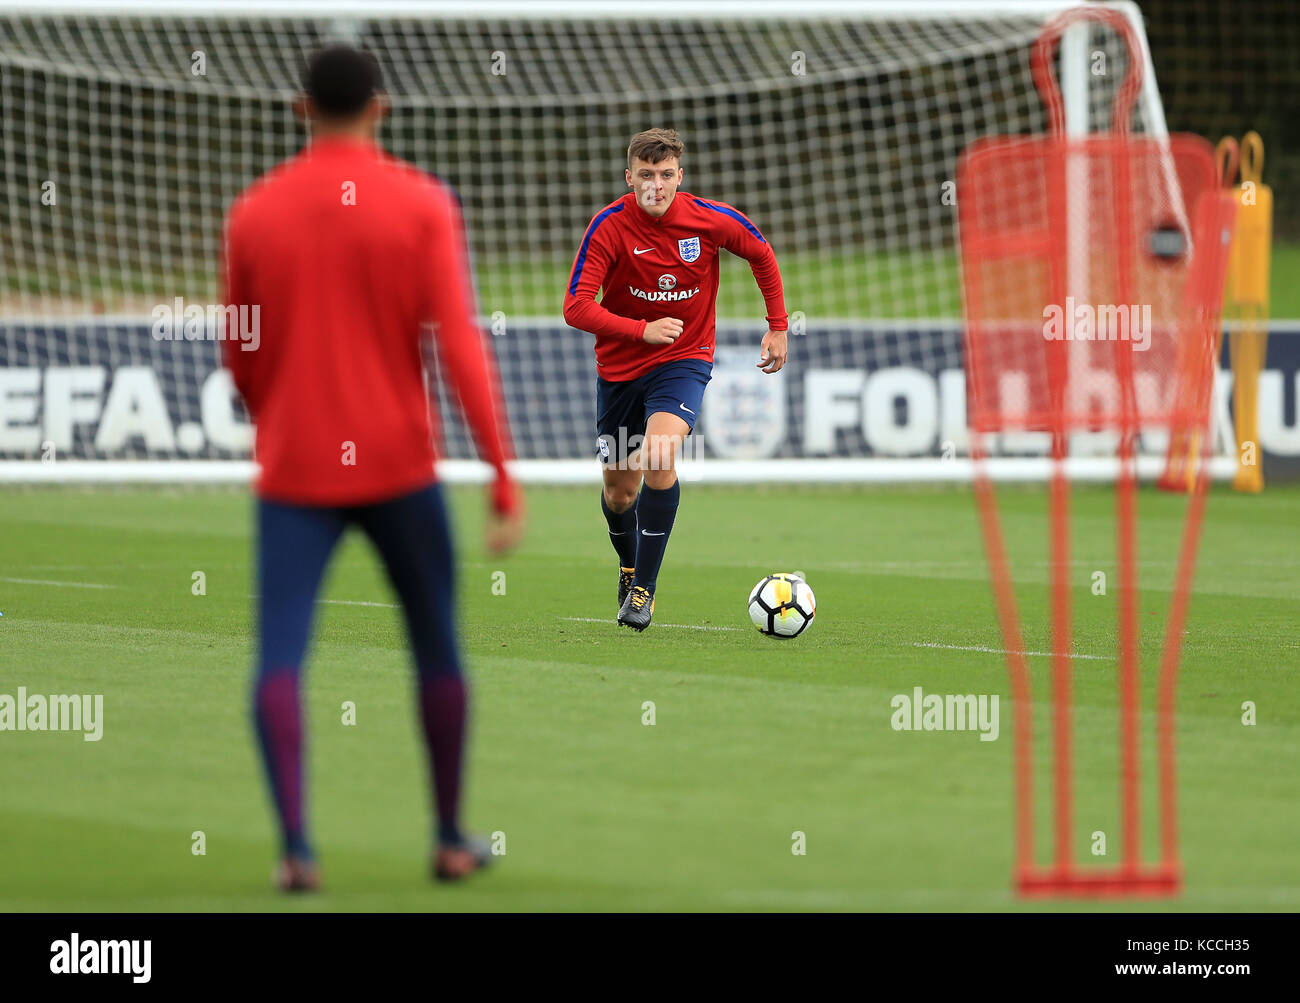 England's Dael Fry during the training session at St George's Park, Burton. PRESS ASSOCIATION Photo. Picture date: Wednesday October 4, 2017. See PA story SOCCER England U21. Photo credit should read: Tim Goode/PA Wire. Stock Photo